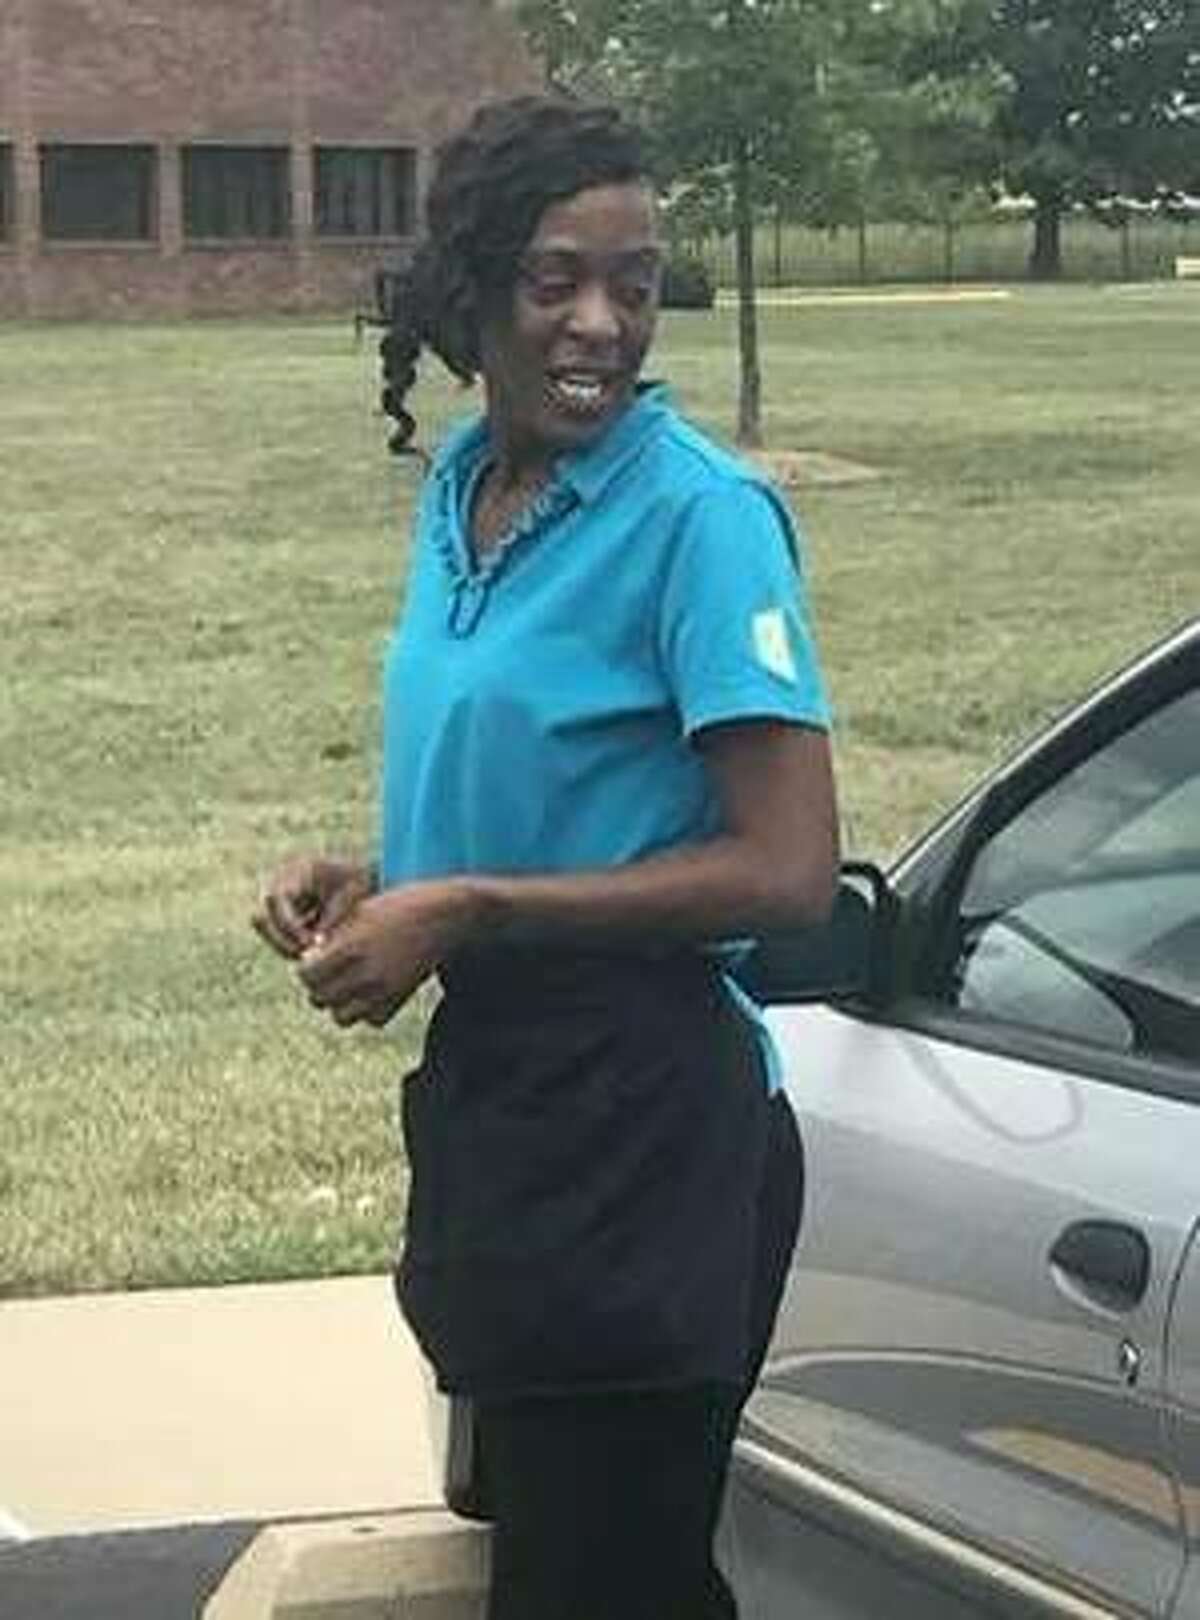 Angel Dotson is seen in front of her 2005 silver Chevy Cavalier.